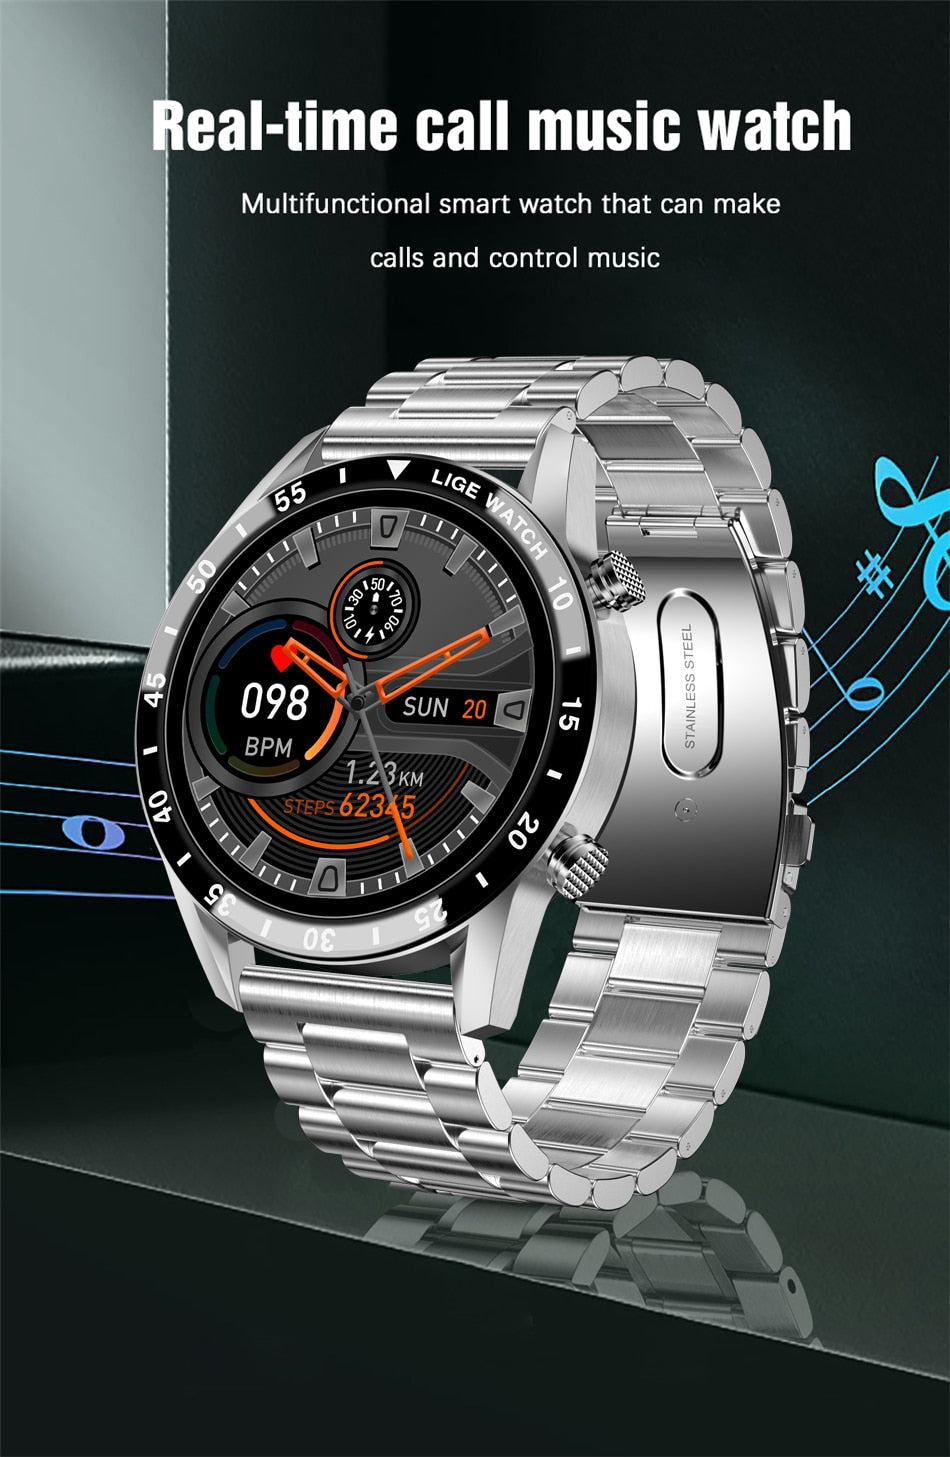 Full Touch Screen Waterproof Bluetooth Call Support Smartwatches IOS Android